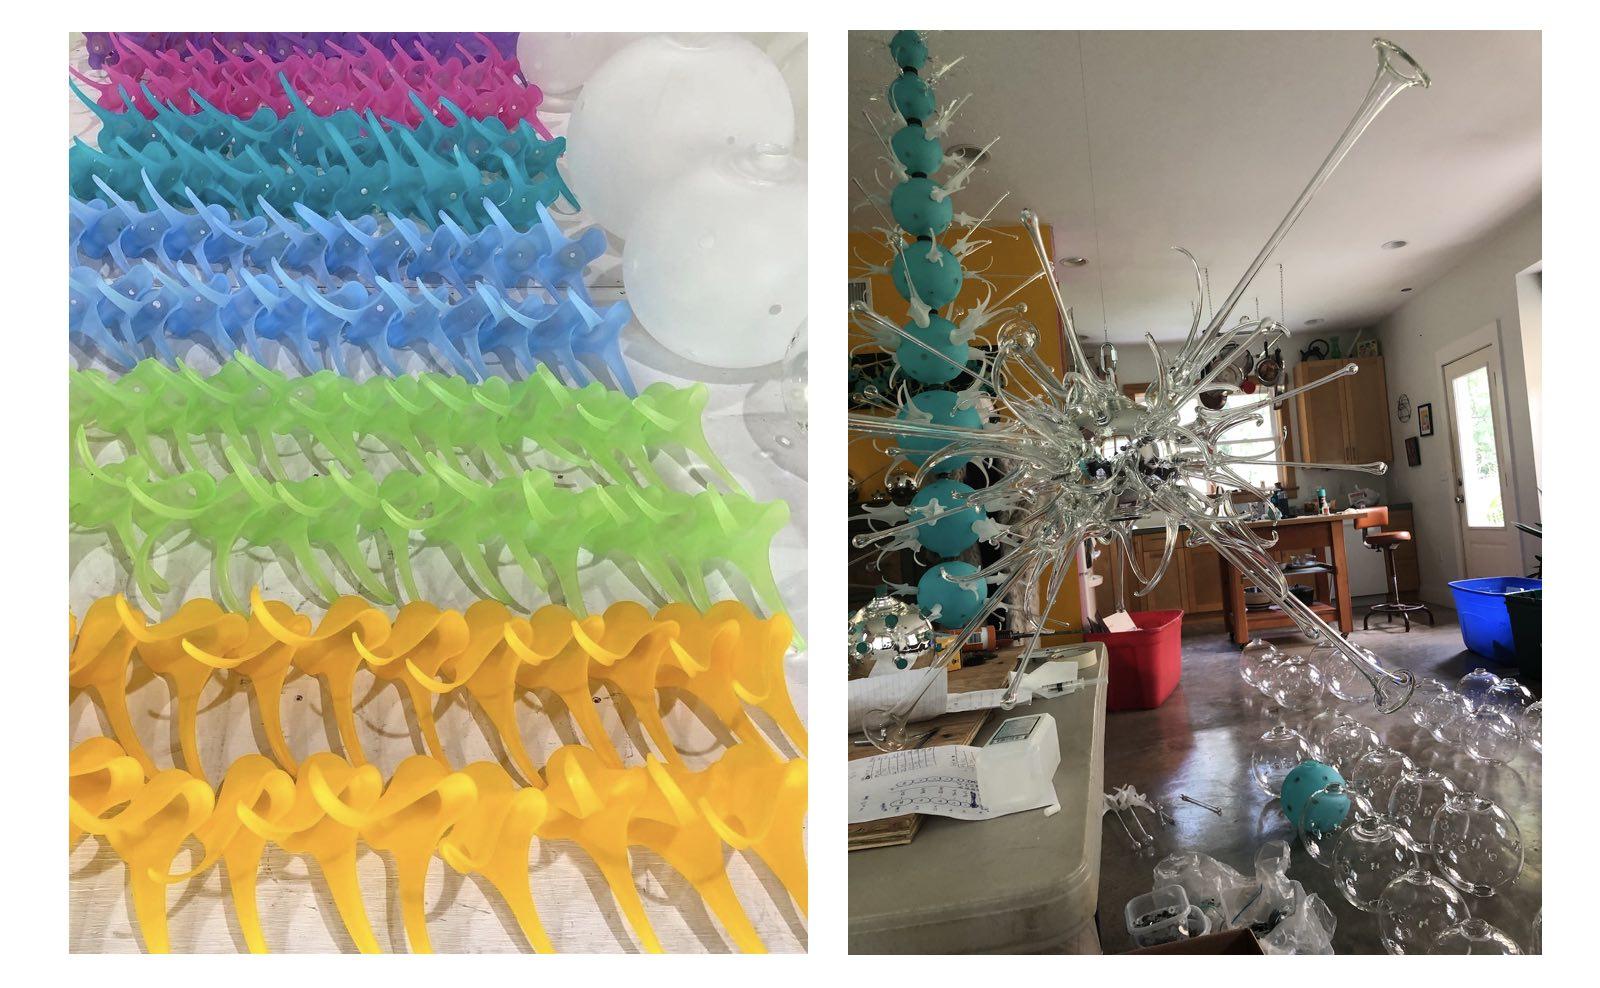 (Left) Hand-painted glass pieces in Davis' studio. (Right) Sculptures shown mid-assembly and taking over Davis' home. Courtesy of the artist.